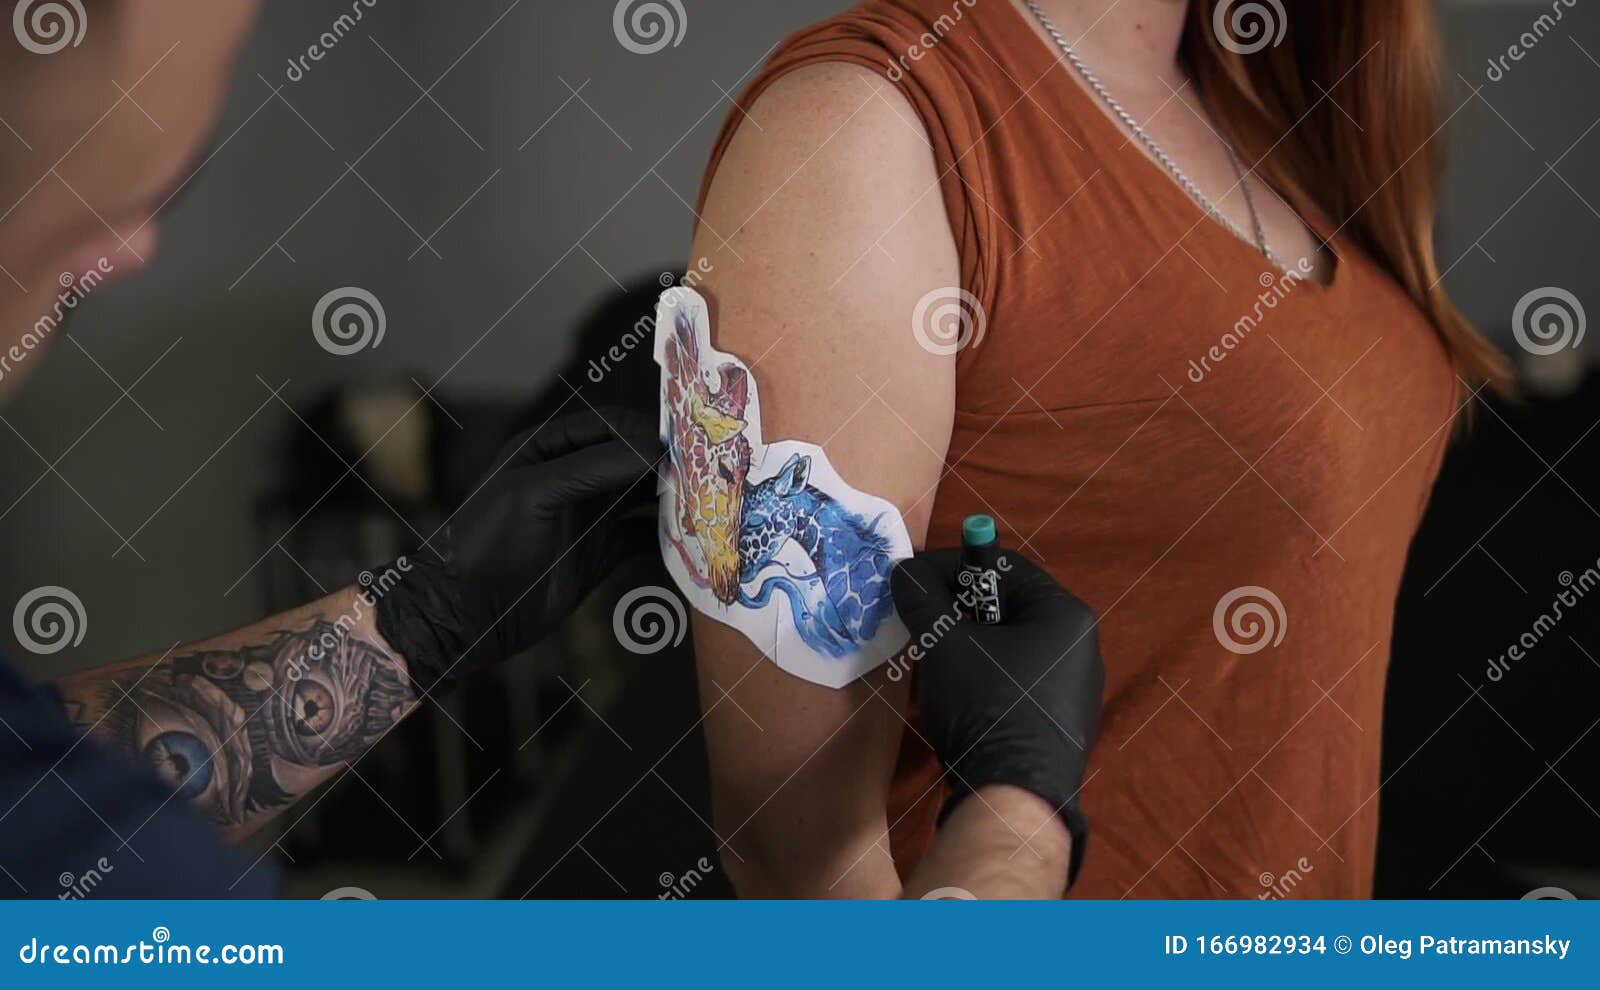 46364 Tattoo Stock Video Footage  4K and HD Video Clips  Shutterstock